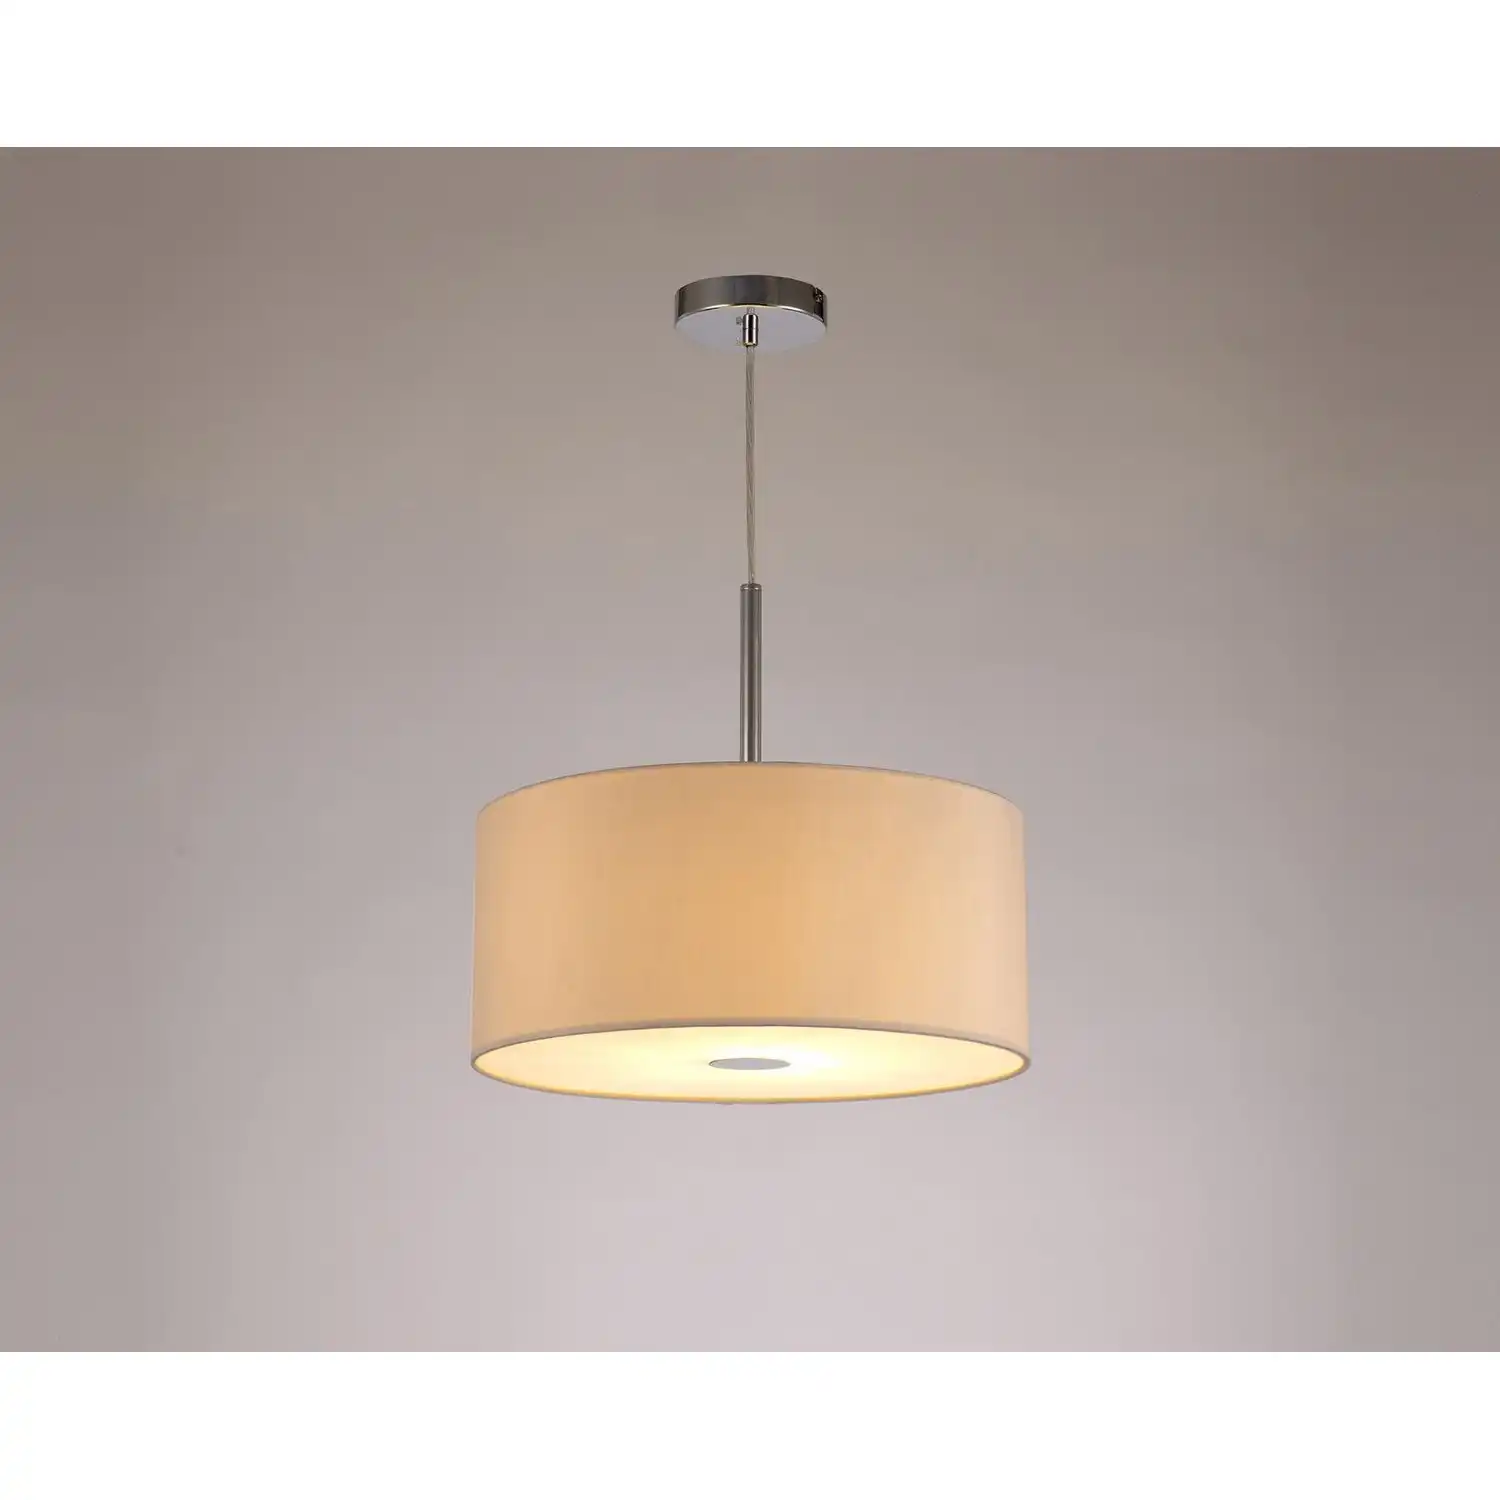 Baymont Polished Chrome 1 Light E27 3m Single Pendant c w 400mm Dual Faux Silk Shade, Nude Beige Moonlight c w 400mm Frosted PC Acrylic Diffuser